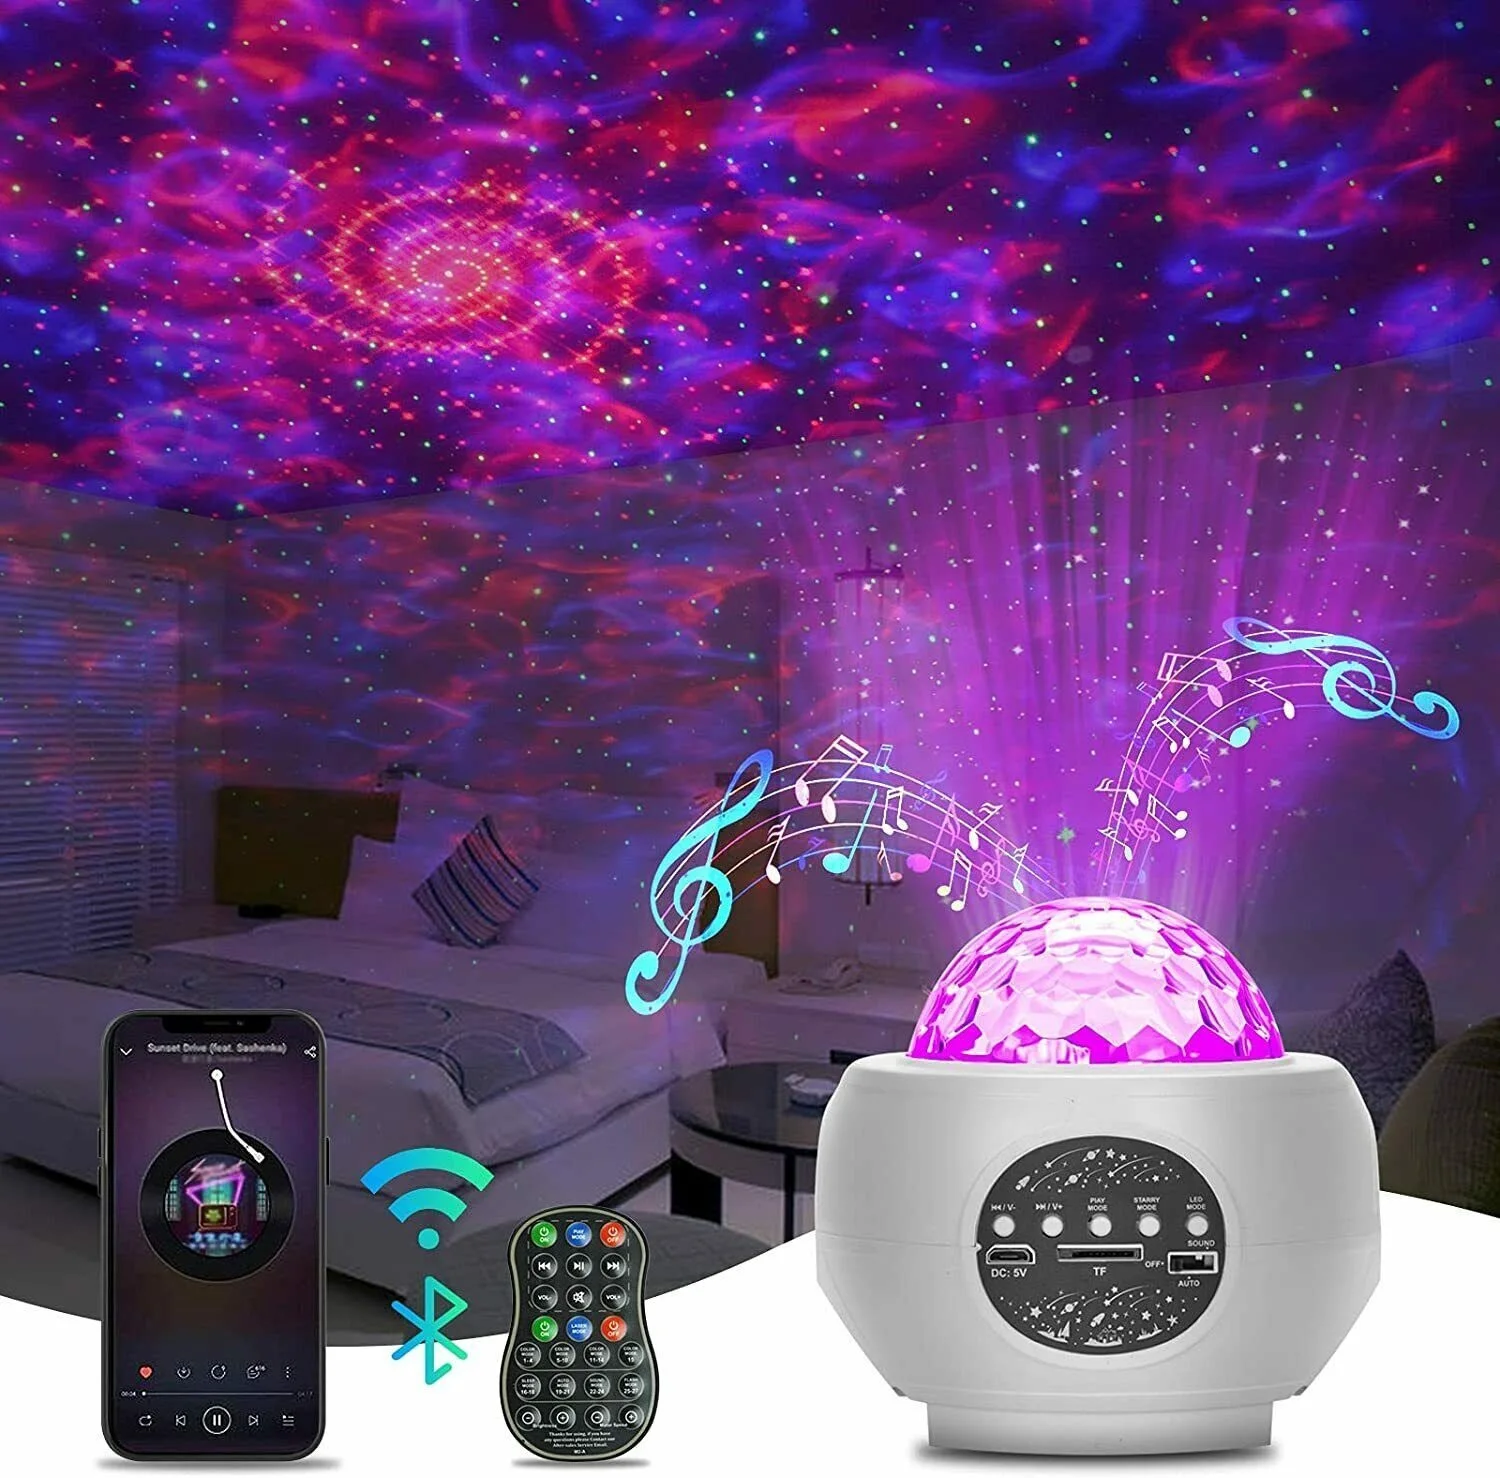 LED Galaxy Starry Night Light Projector Ocean Star Sky Party Decor Lamp Remote 